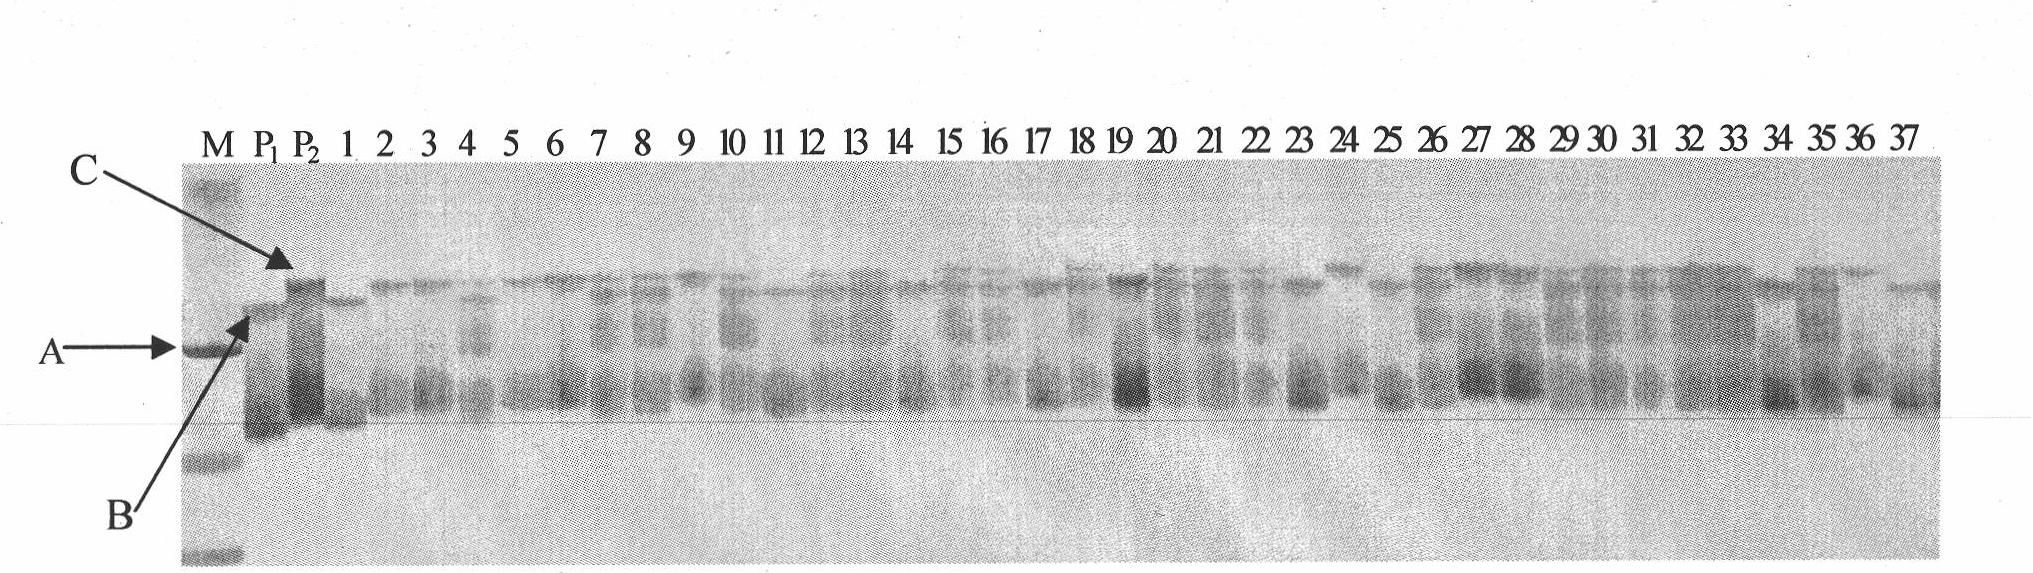 Brown spot resistant, sensitive gene fragment of cucumber and uses thereof